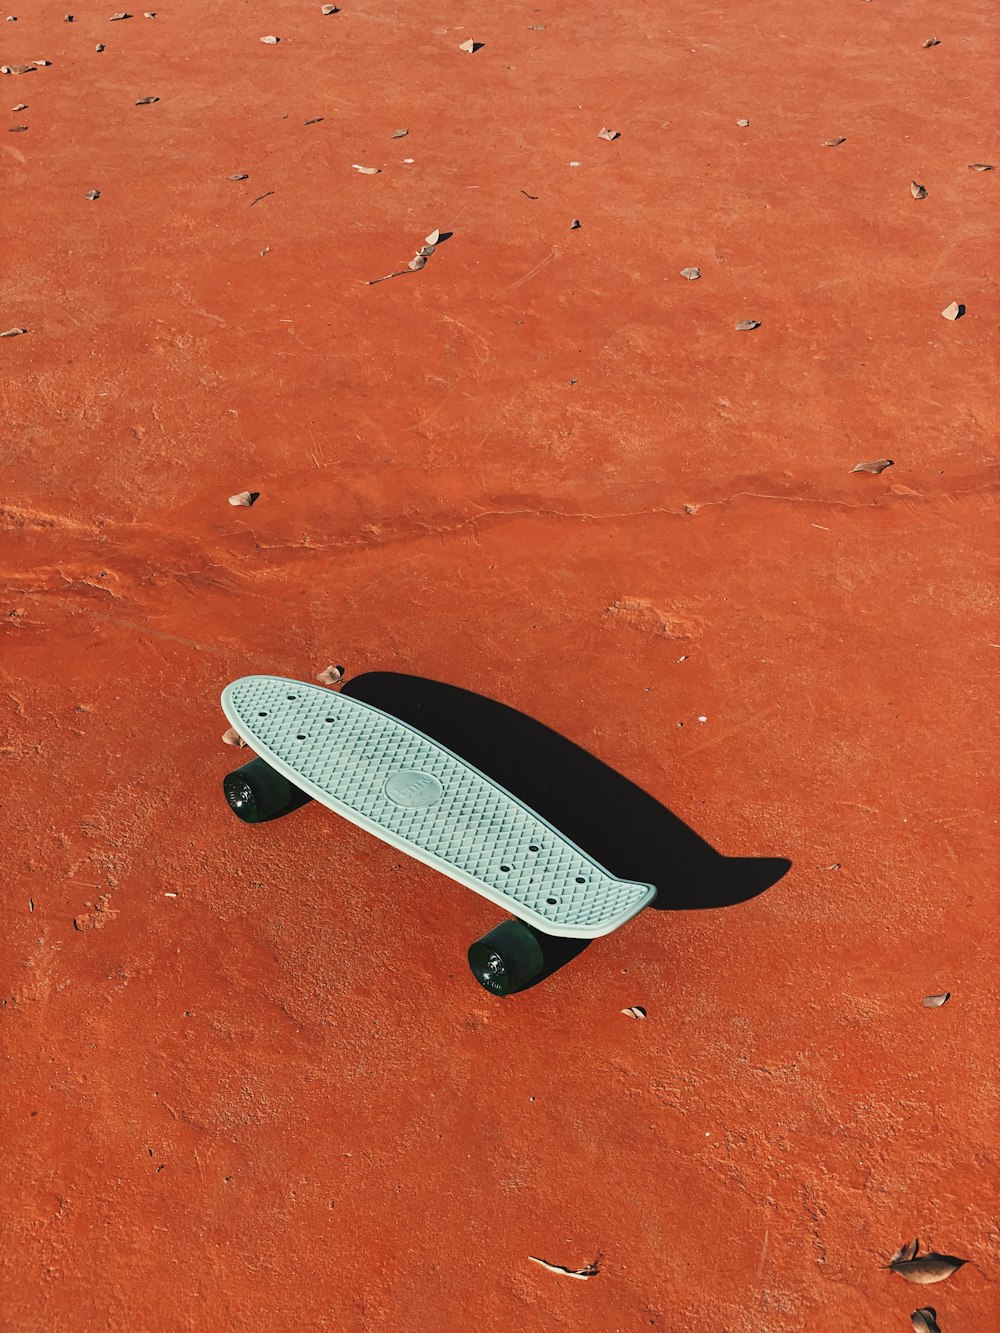 white and black skateboard on brown sand